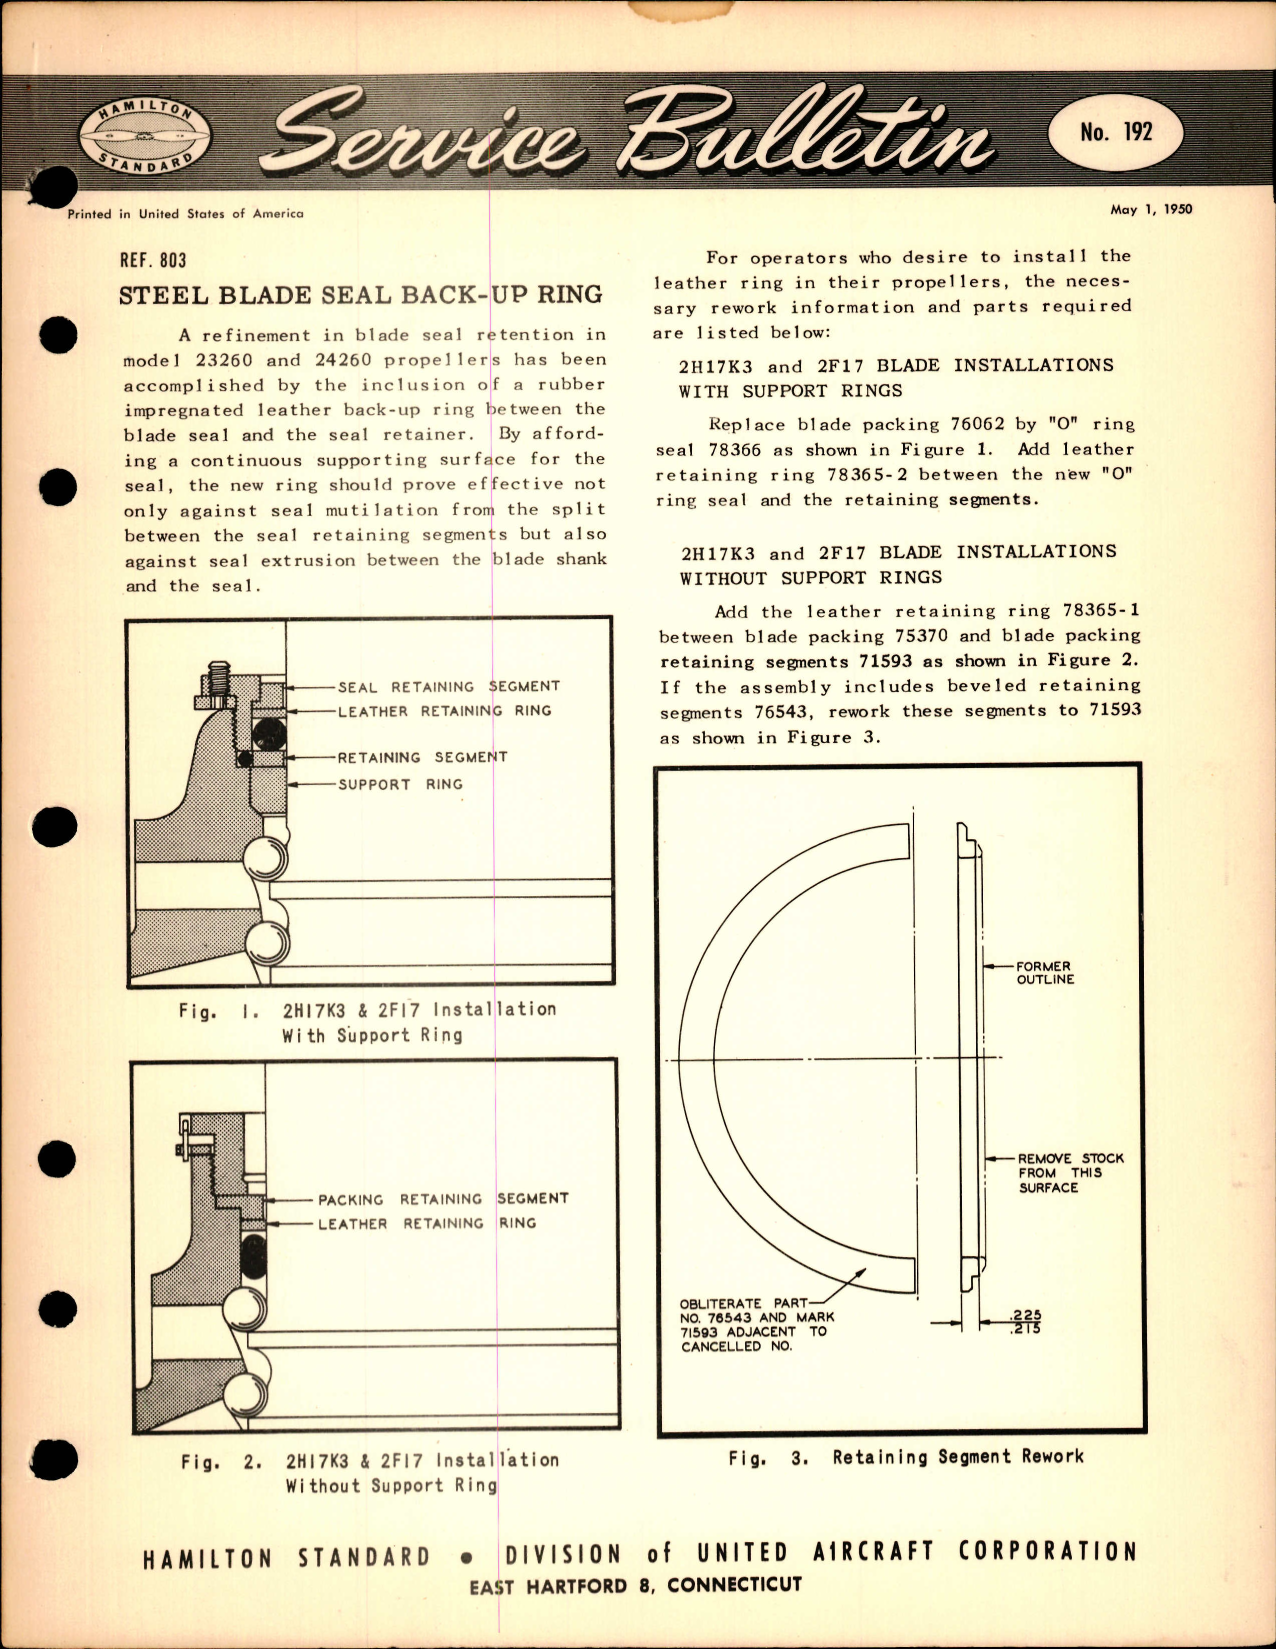 Sample page 1 from AirCorps Library document: Steel Blade Seal Back-Up Ring, Ref 803